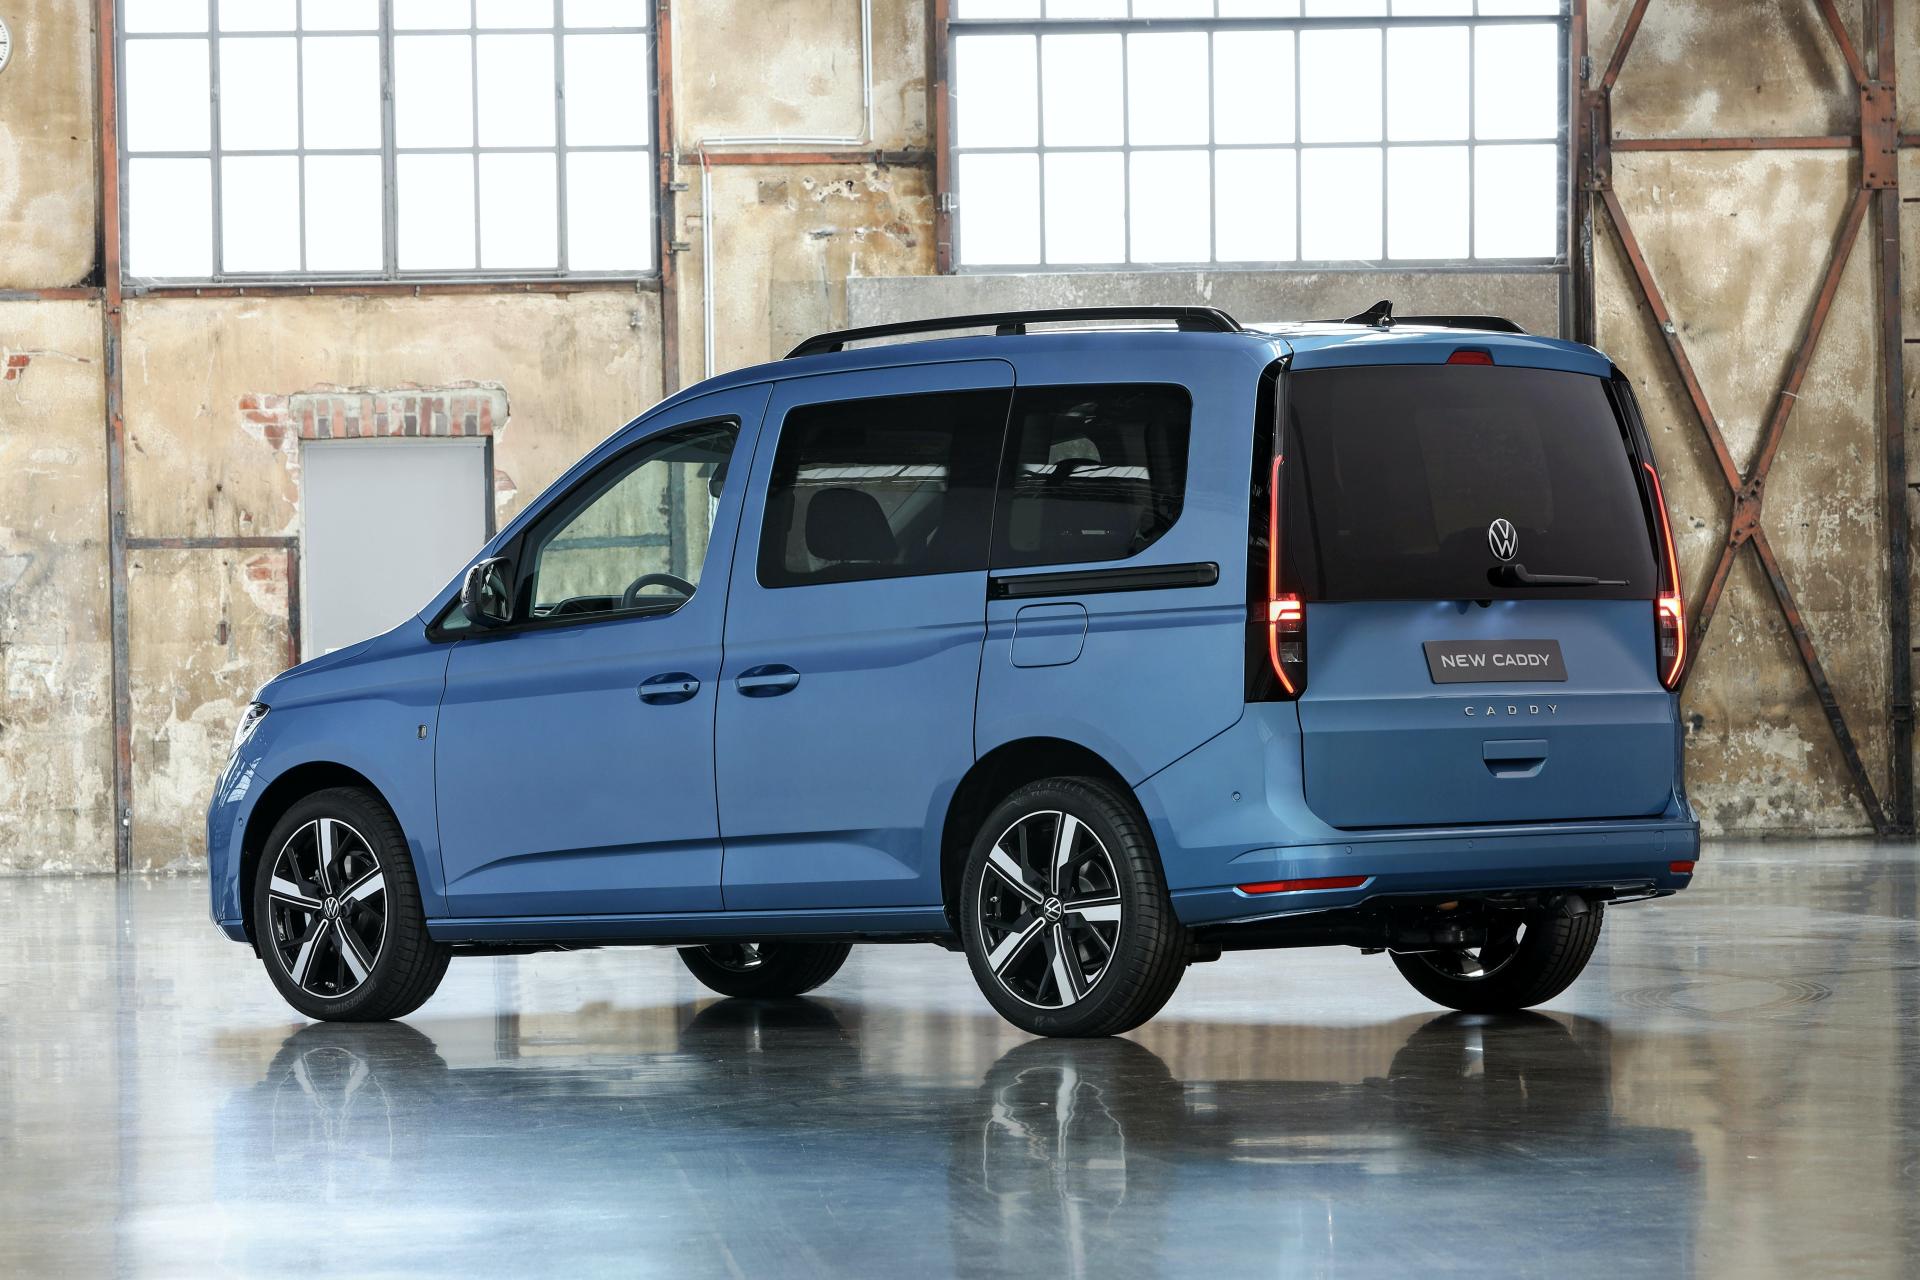 New 2021 VW Caddy Wraps MQB Underpinnings In Evolutionary Styling (60